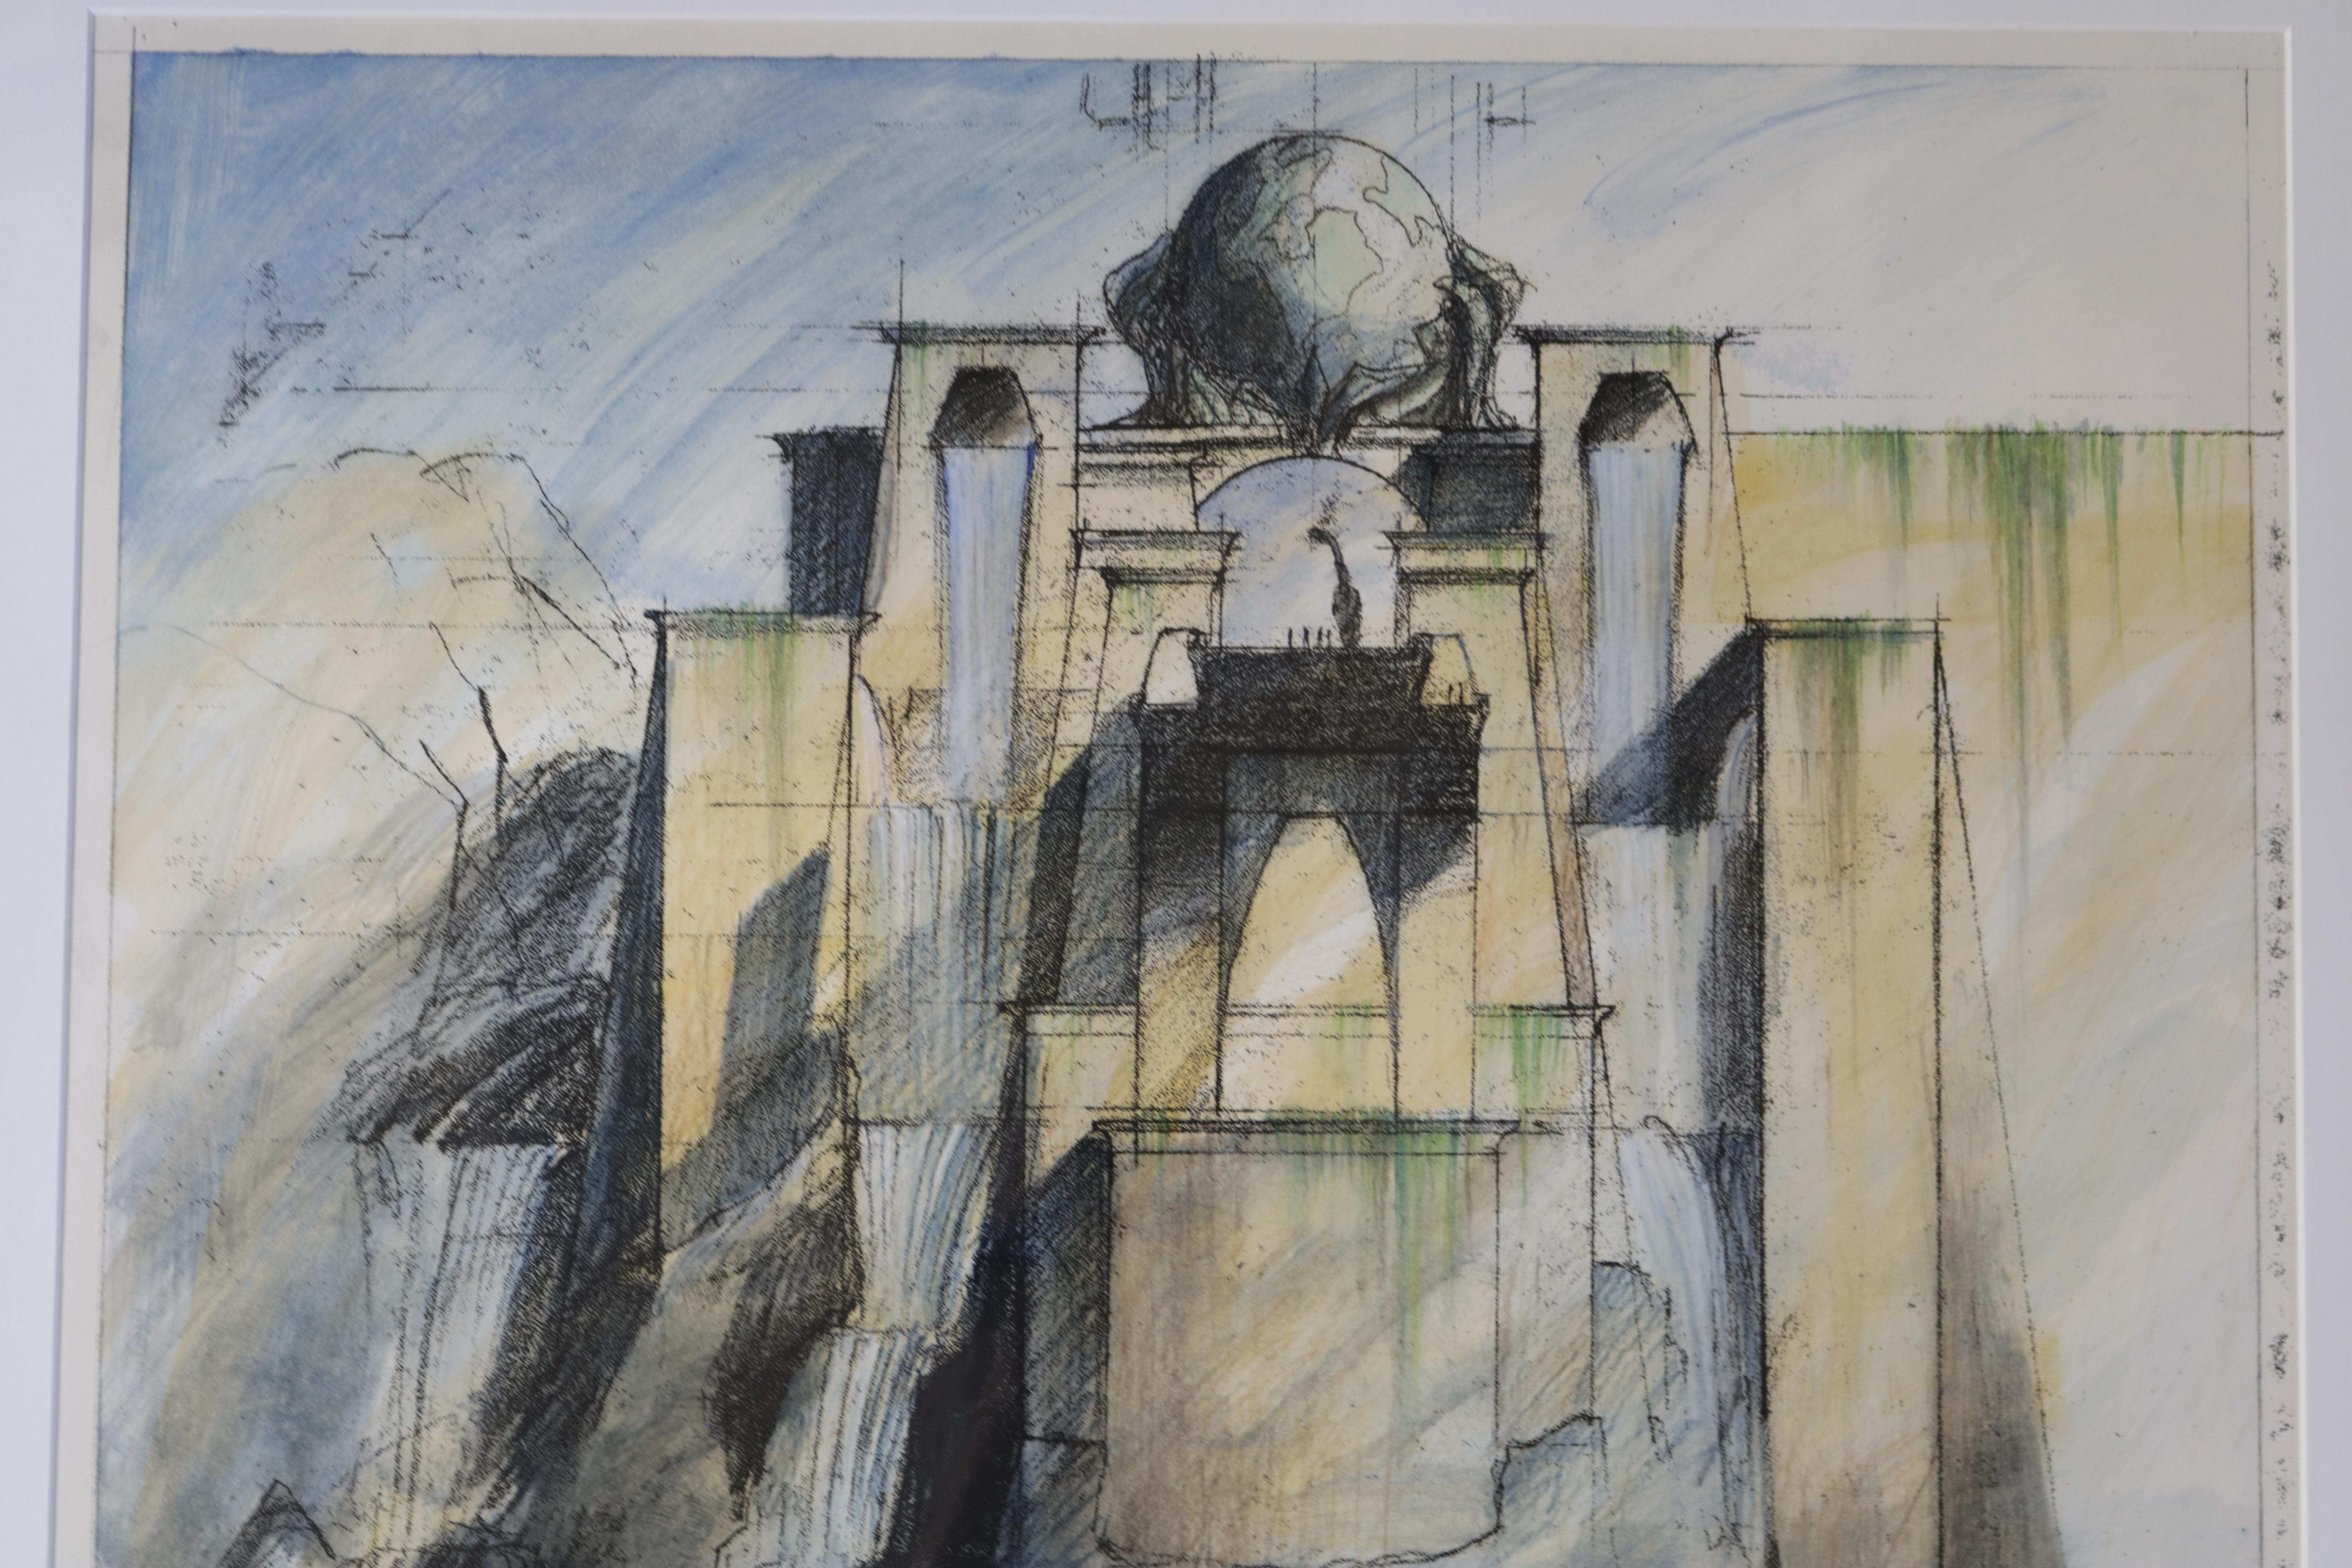 This piece is a set design unique sketch from the 2002 